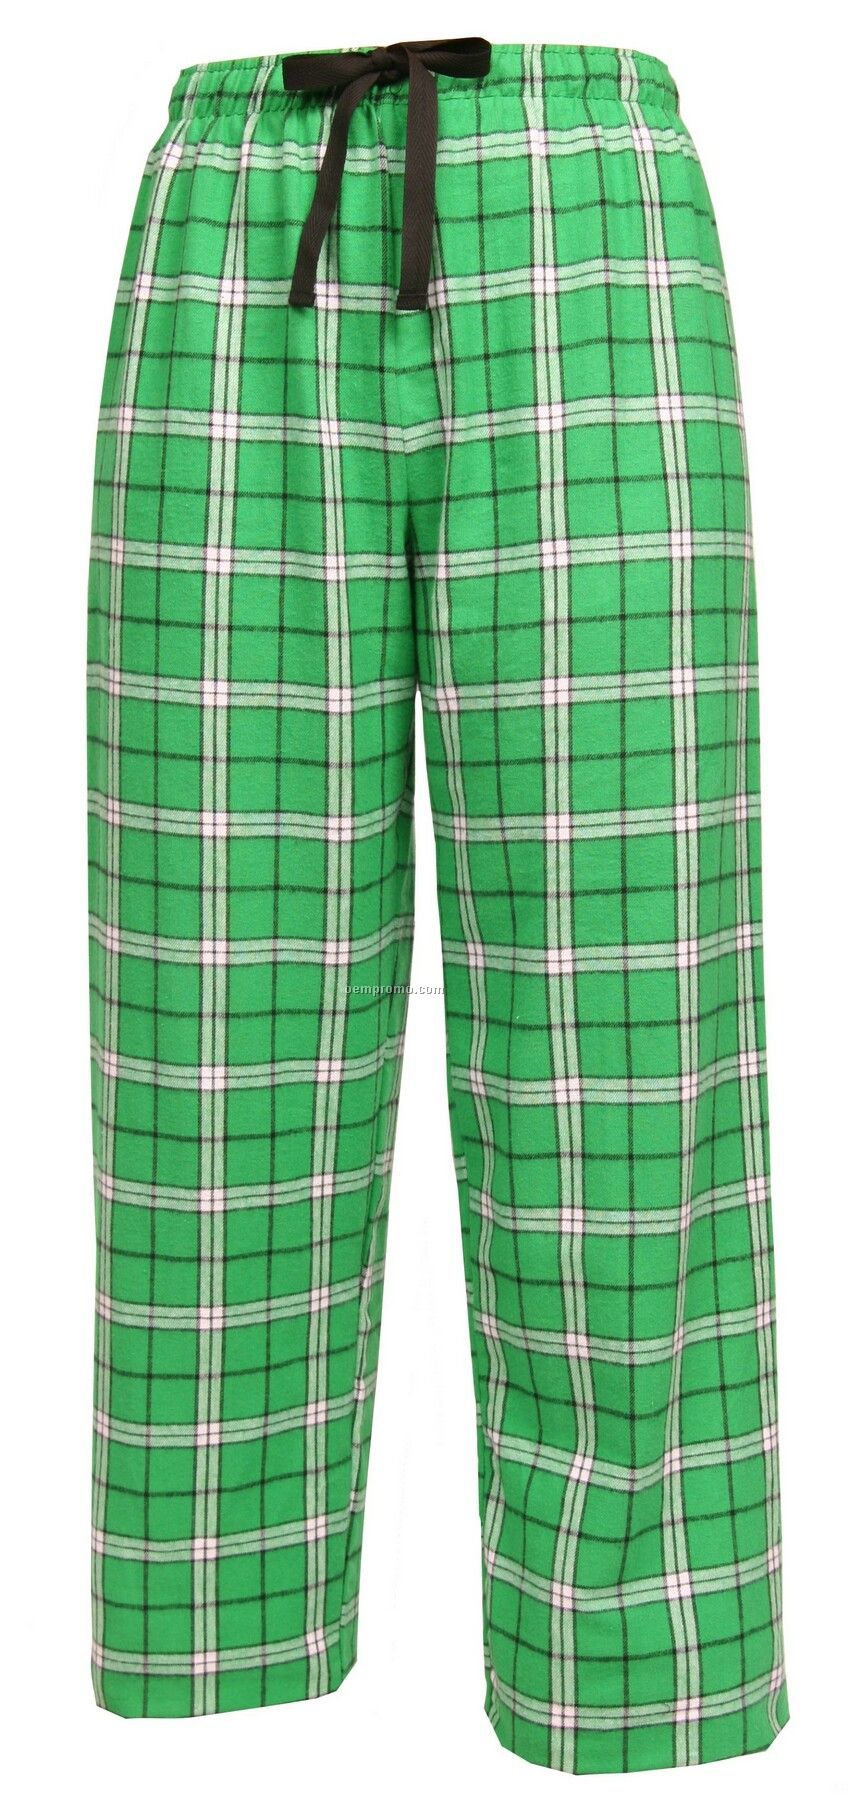 Adult Team Pride Flannel Pant In Kelly Green & White Plaid